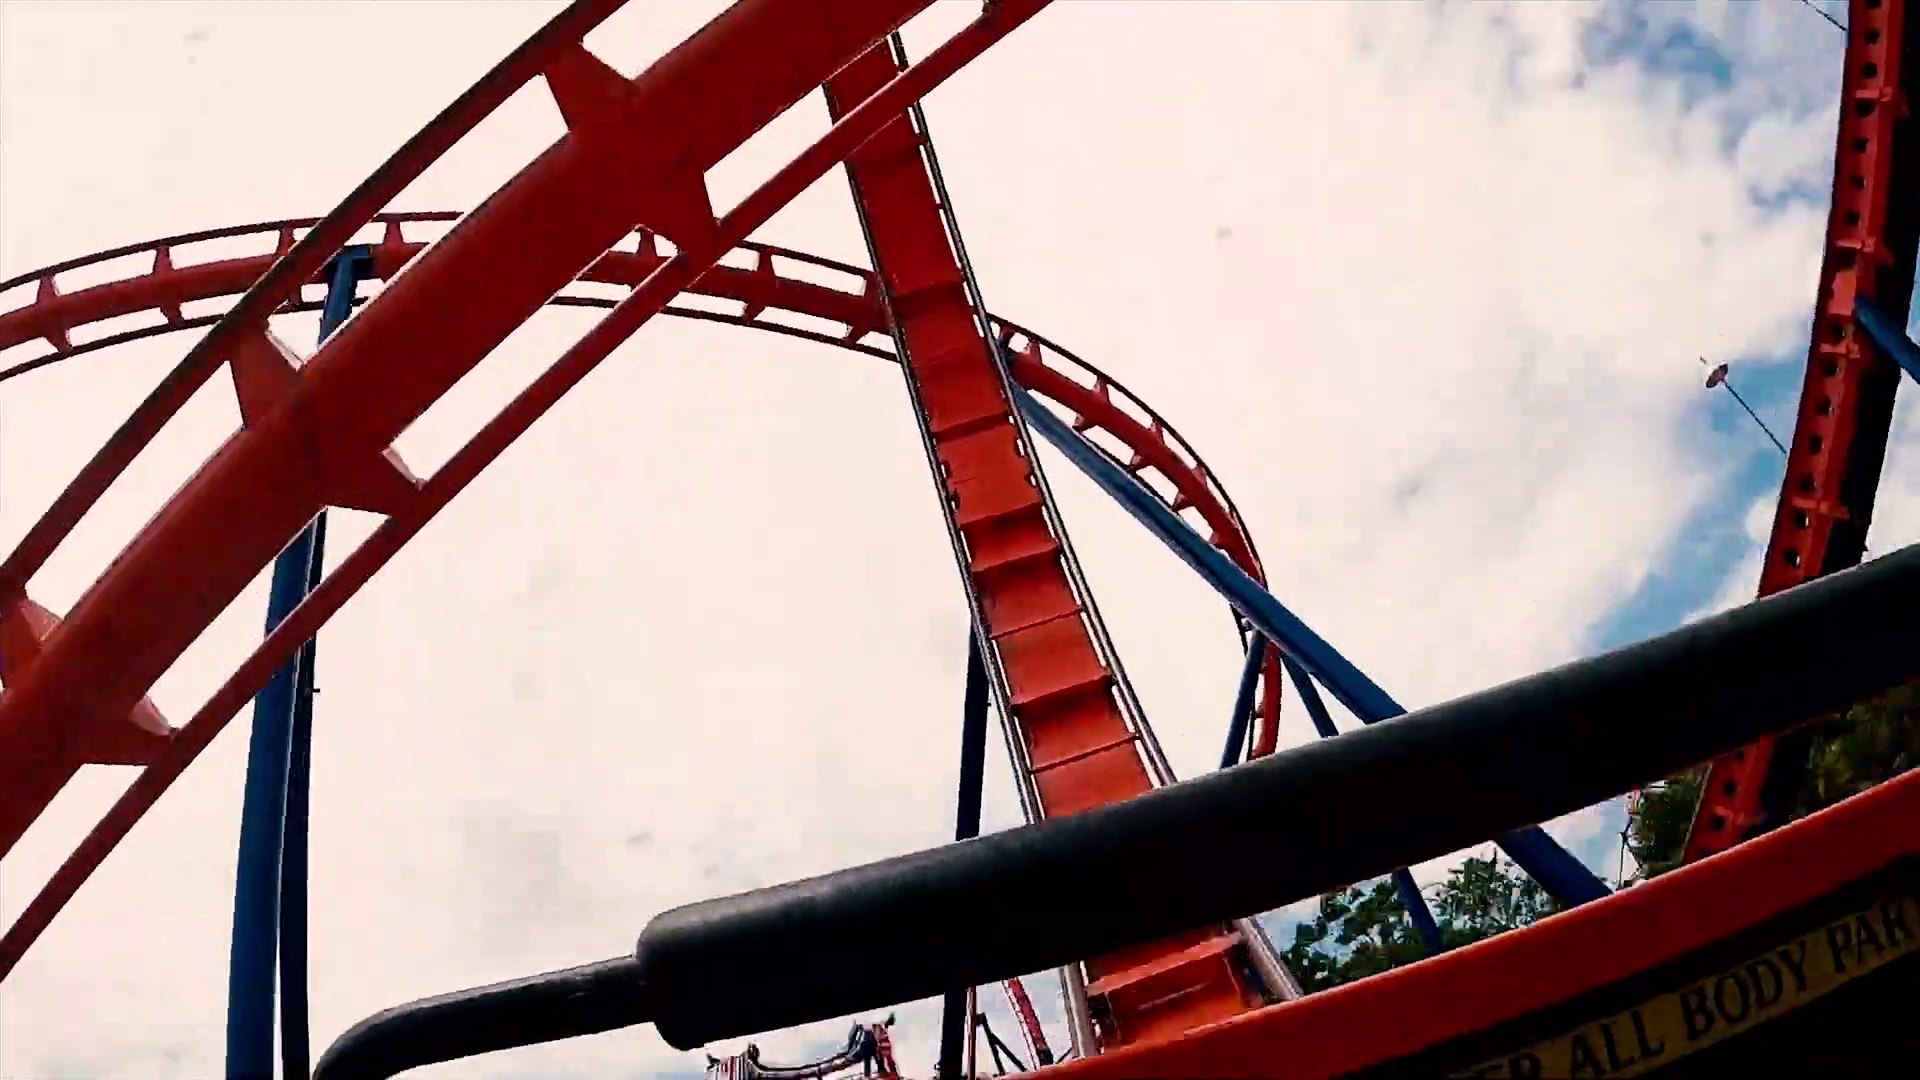 SheiKra Front Row POV Ride at Busch Gardens Tampa Bay on Roller